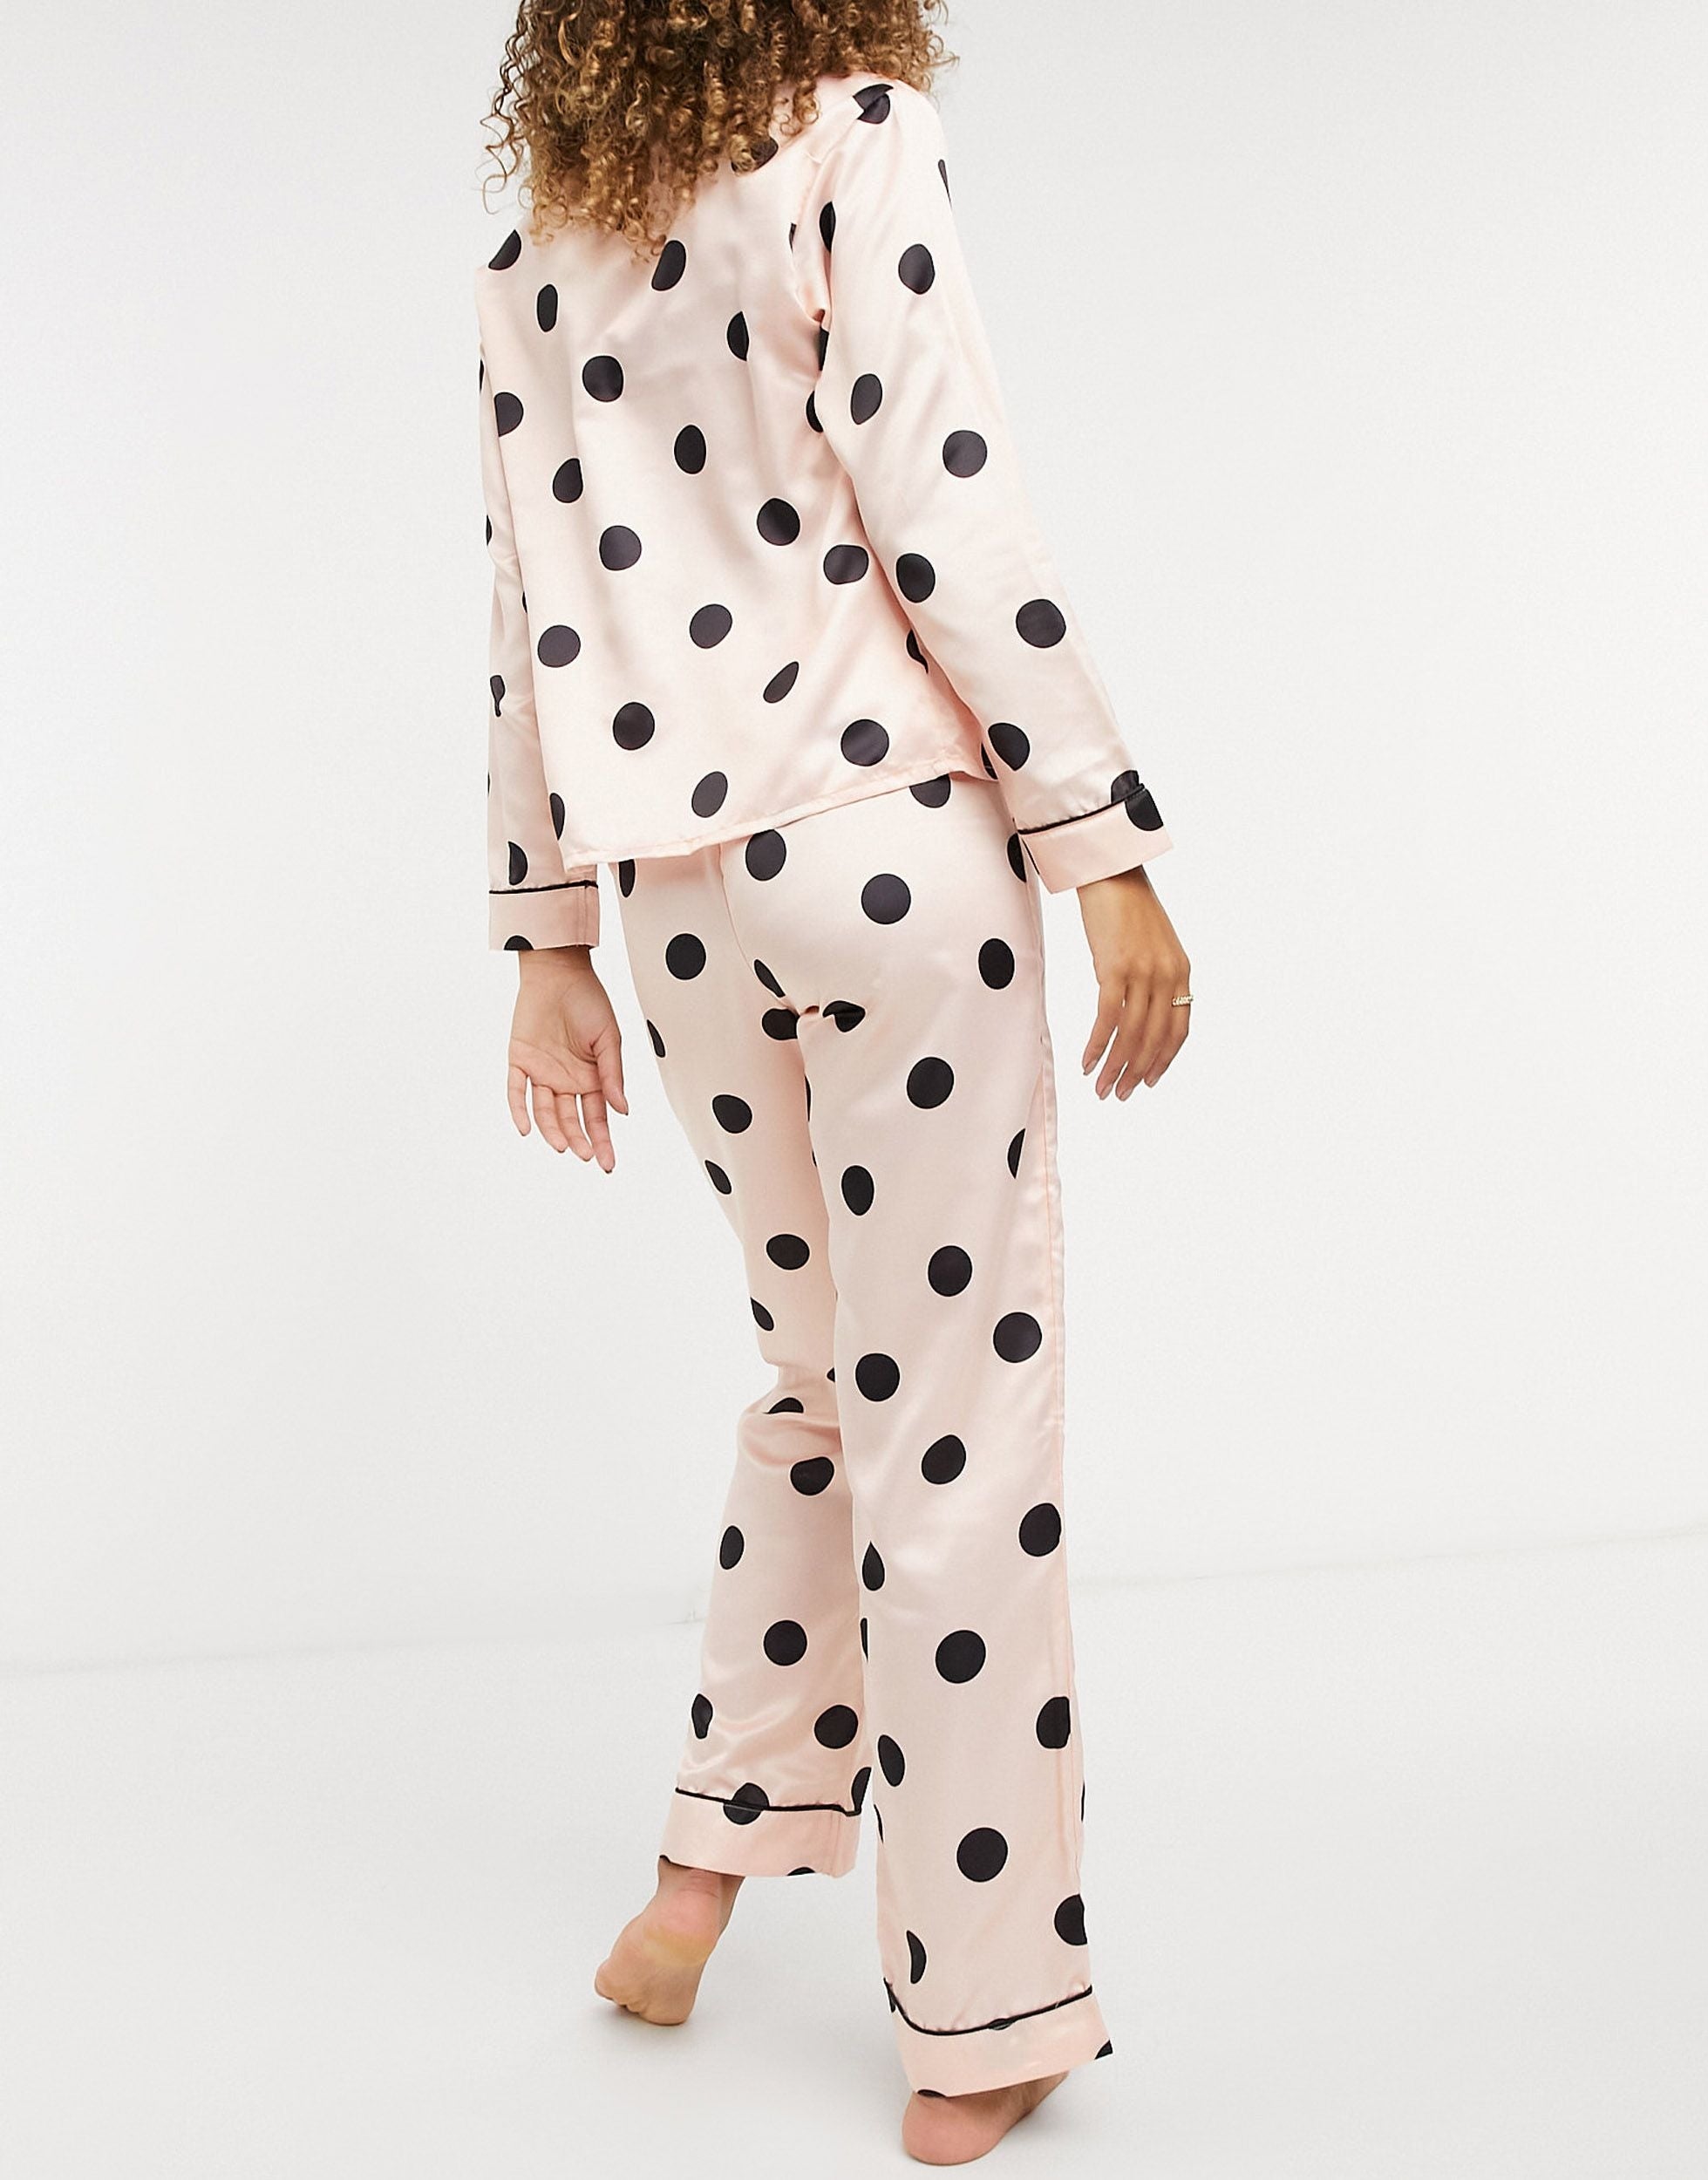 Peach Color Digital Abstract Printed loungewear/Nightsuit For Women With Pants.